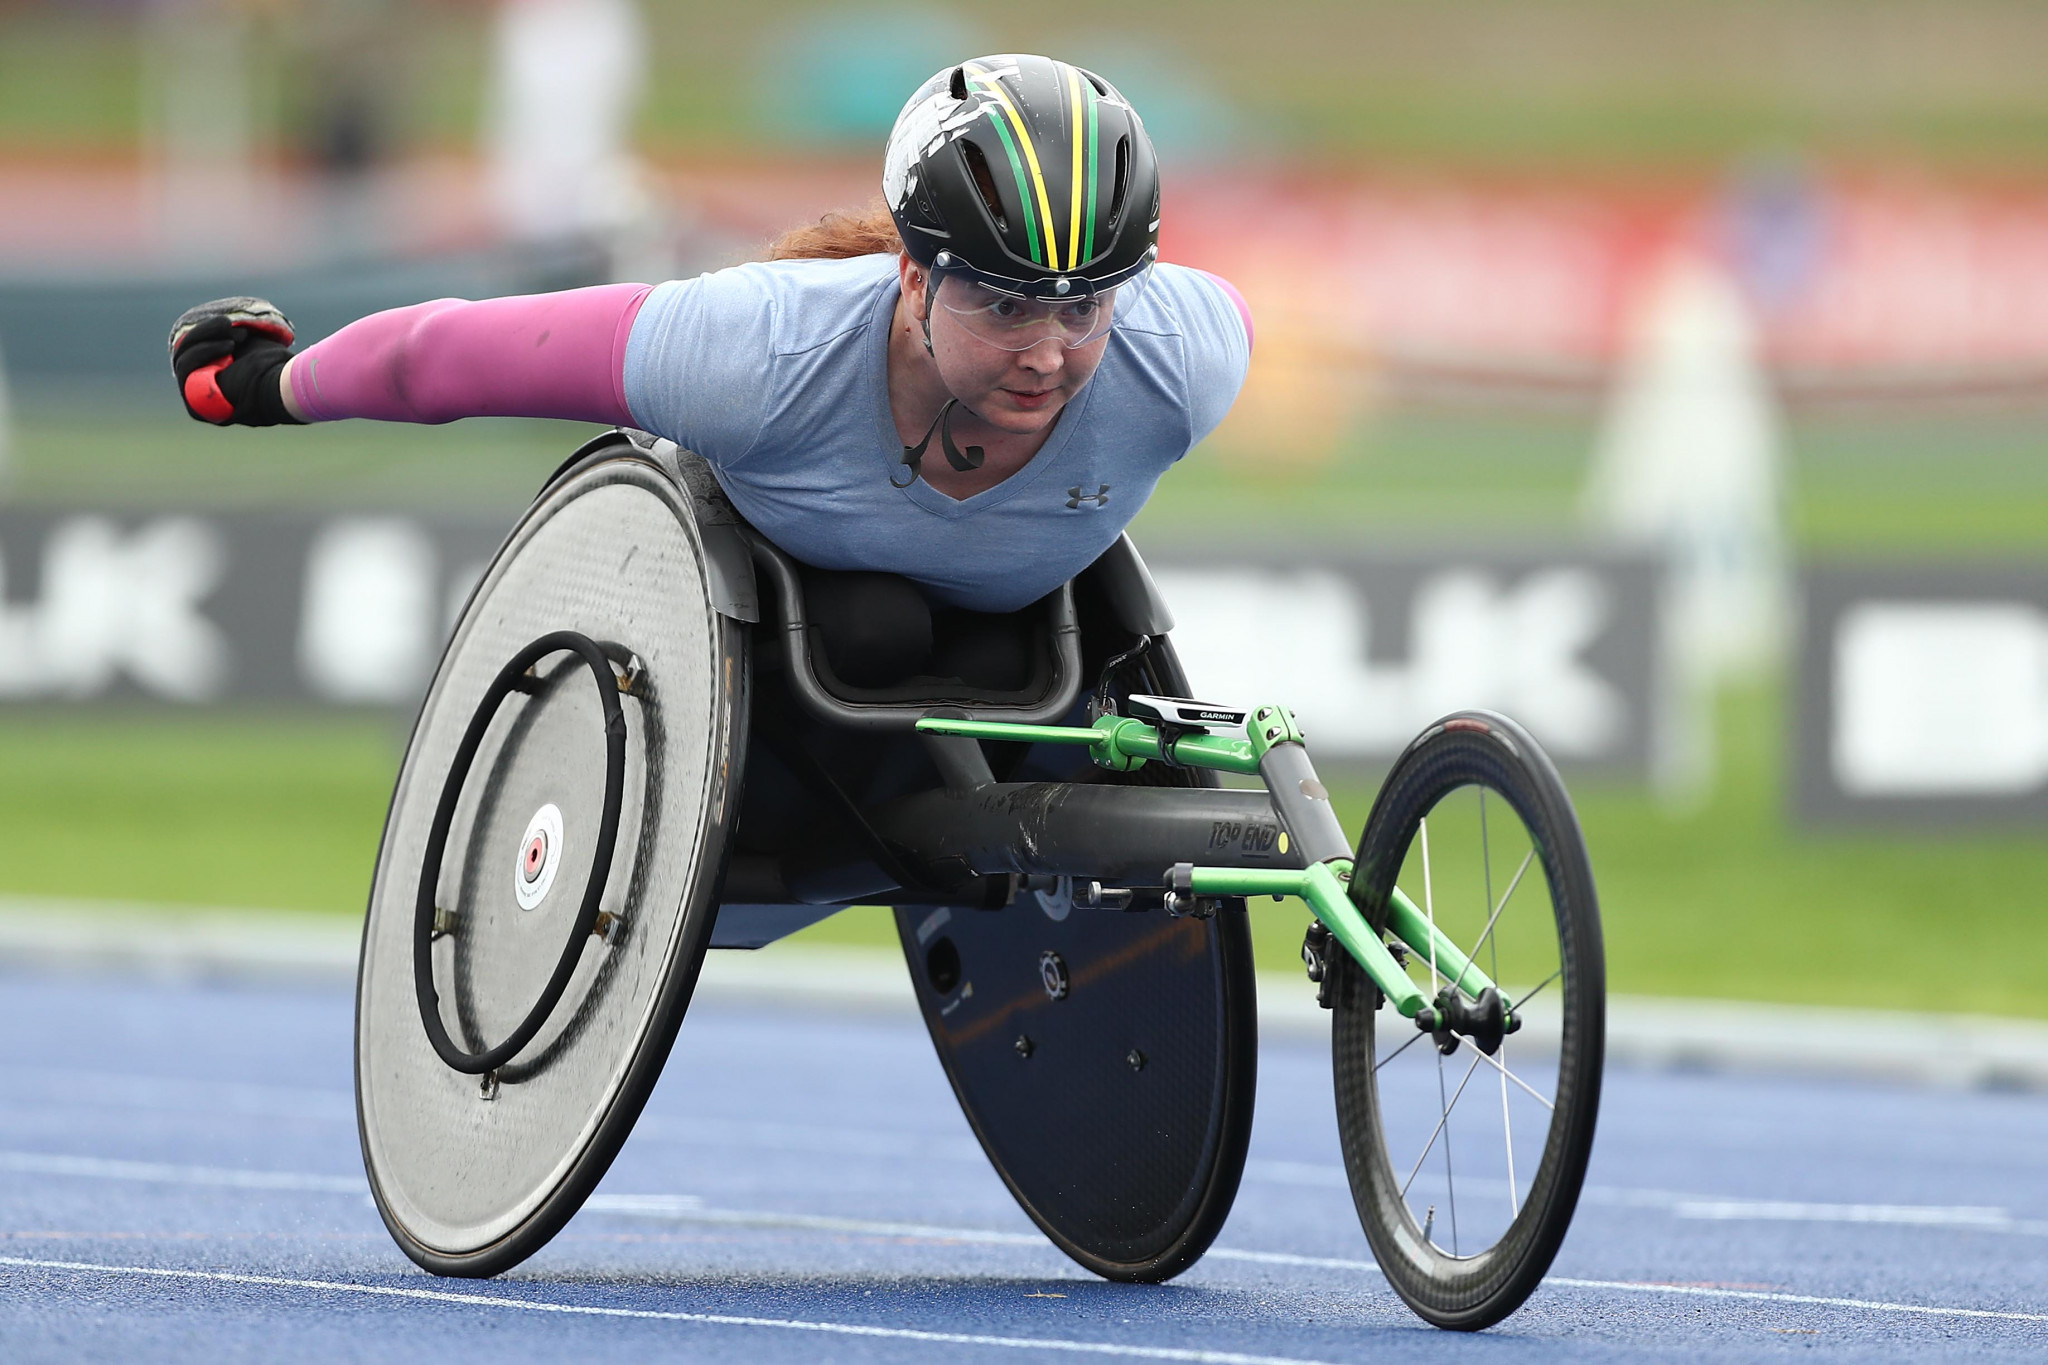 Angie Ballard is set to co-captain the Australian team on her seventh Paralympic Games appearance at Paris 2024 ©Getty Images